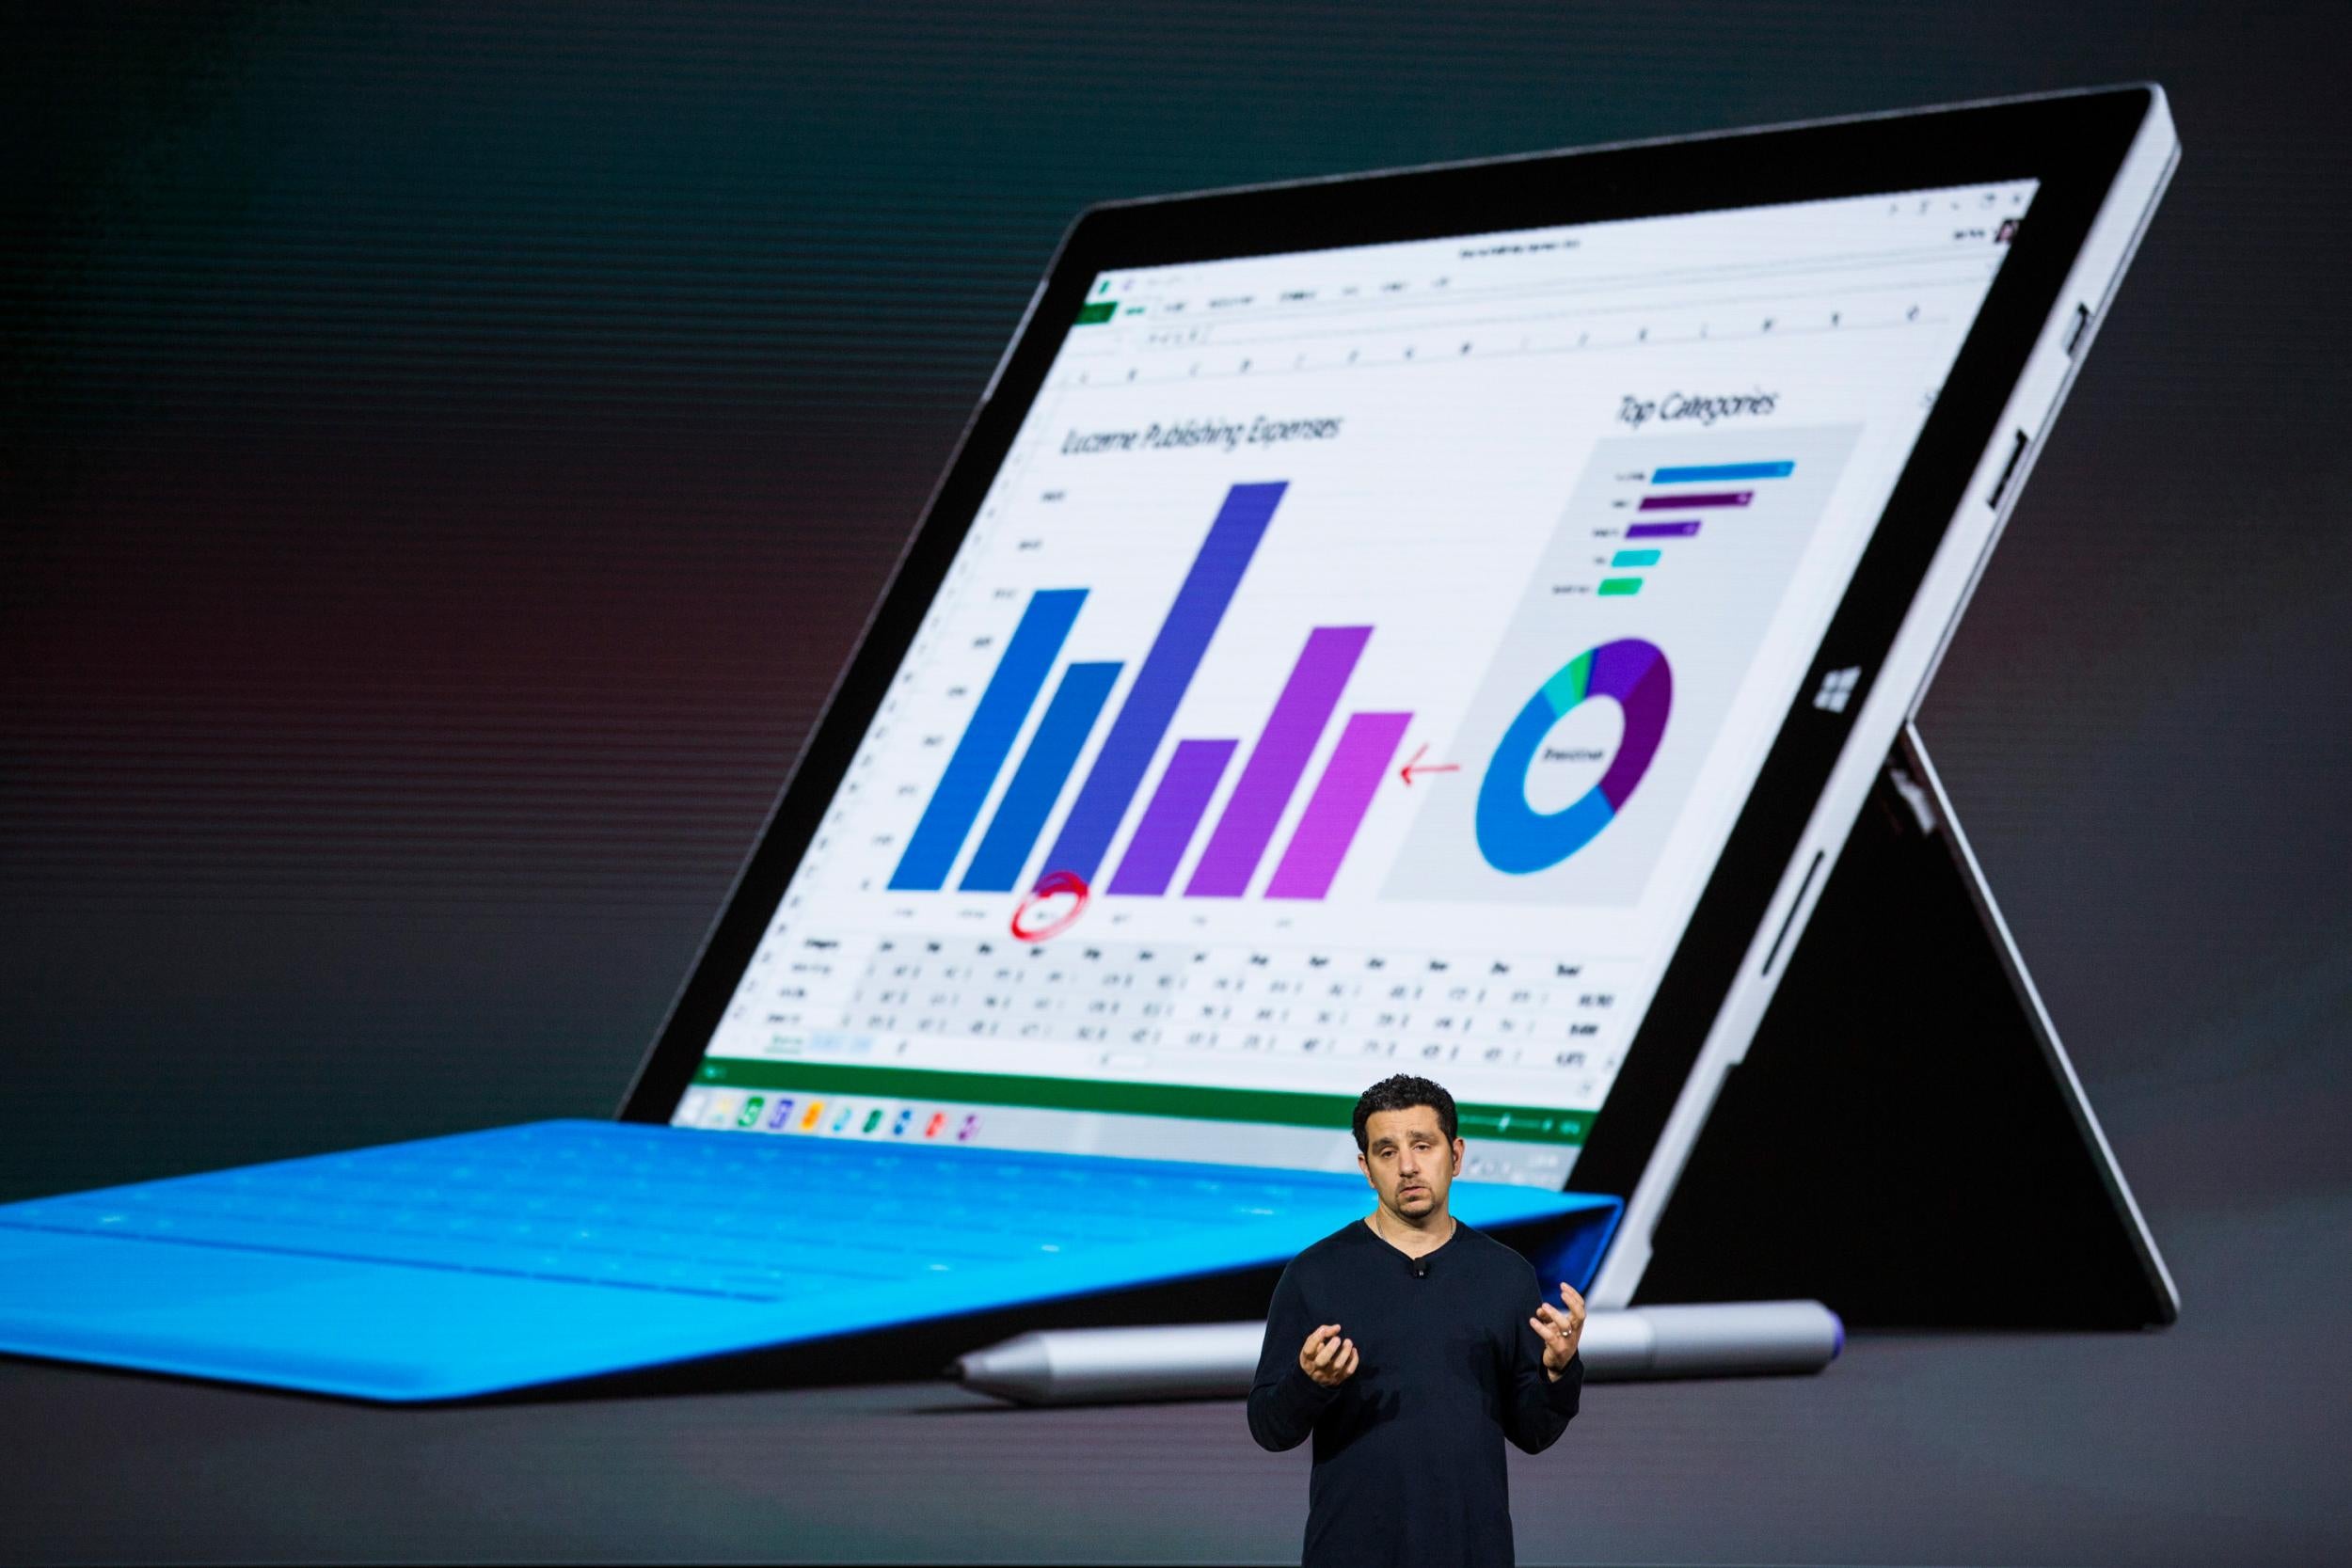 Microsoft corporate vice president Panos Panay unveils the new Windows 10-powered Surface Pro 4 at an even in October 2015